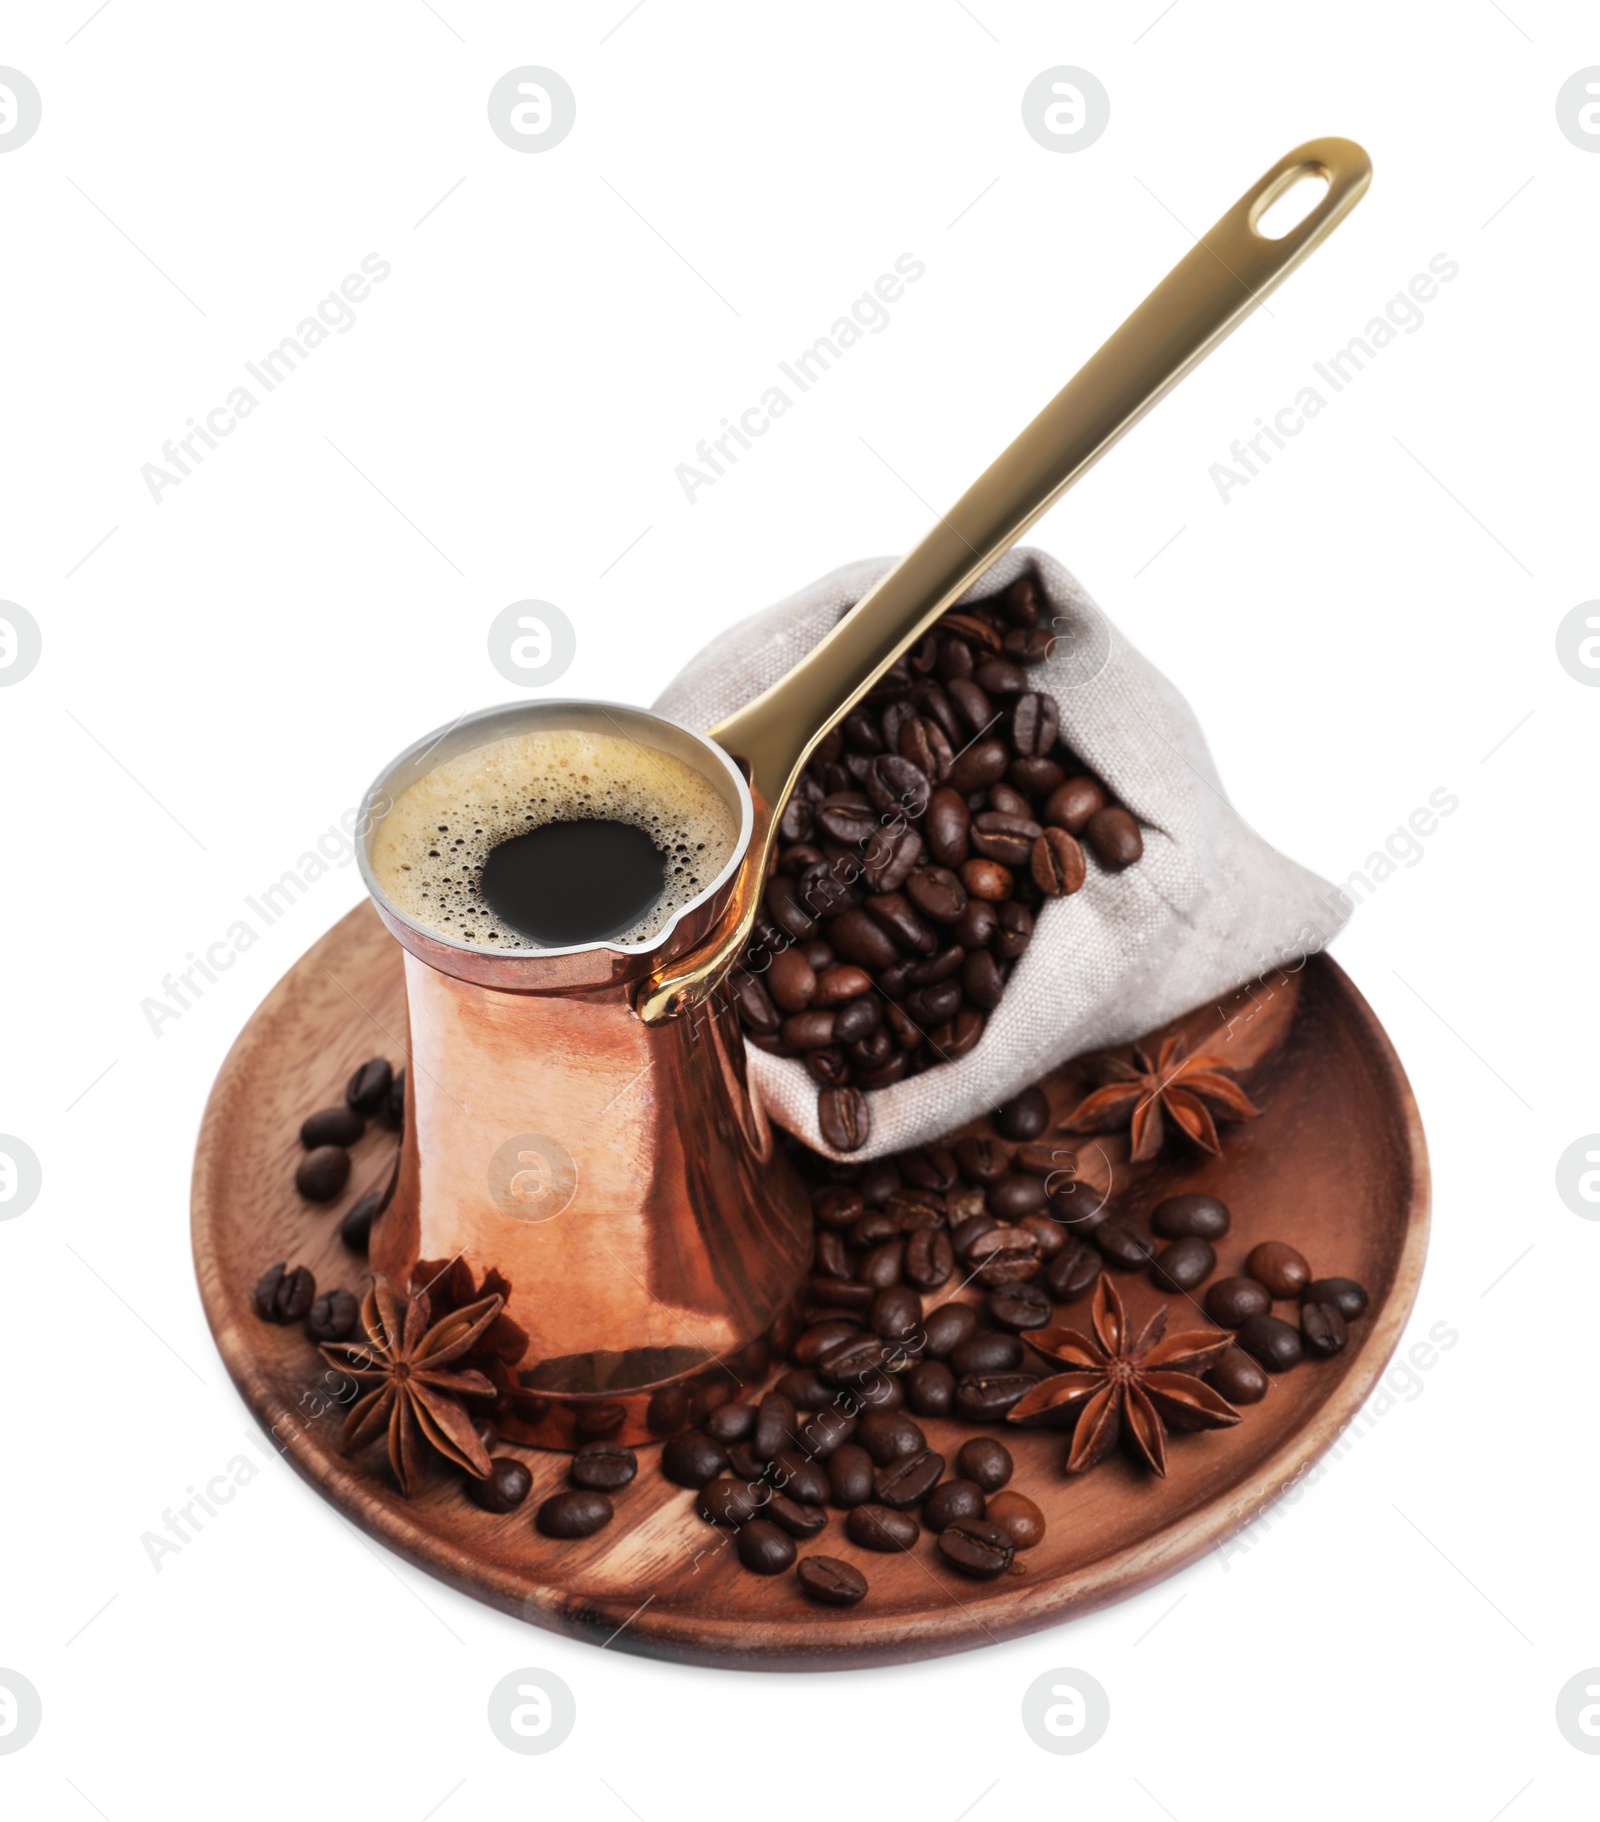 Photo of Copper turkish coffee pot with hot drink, anise stars and beans on white background